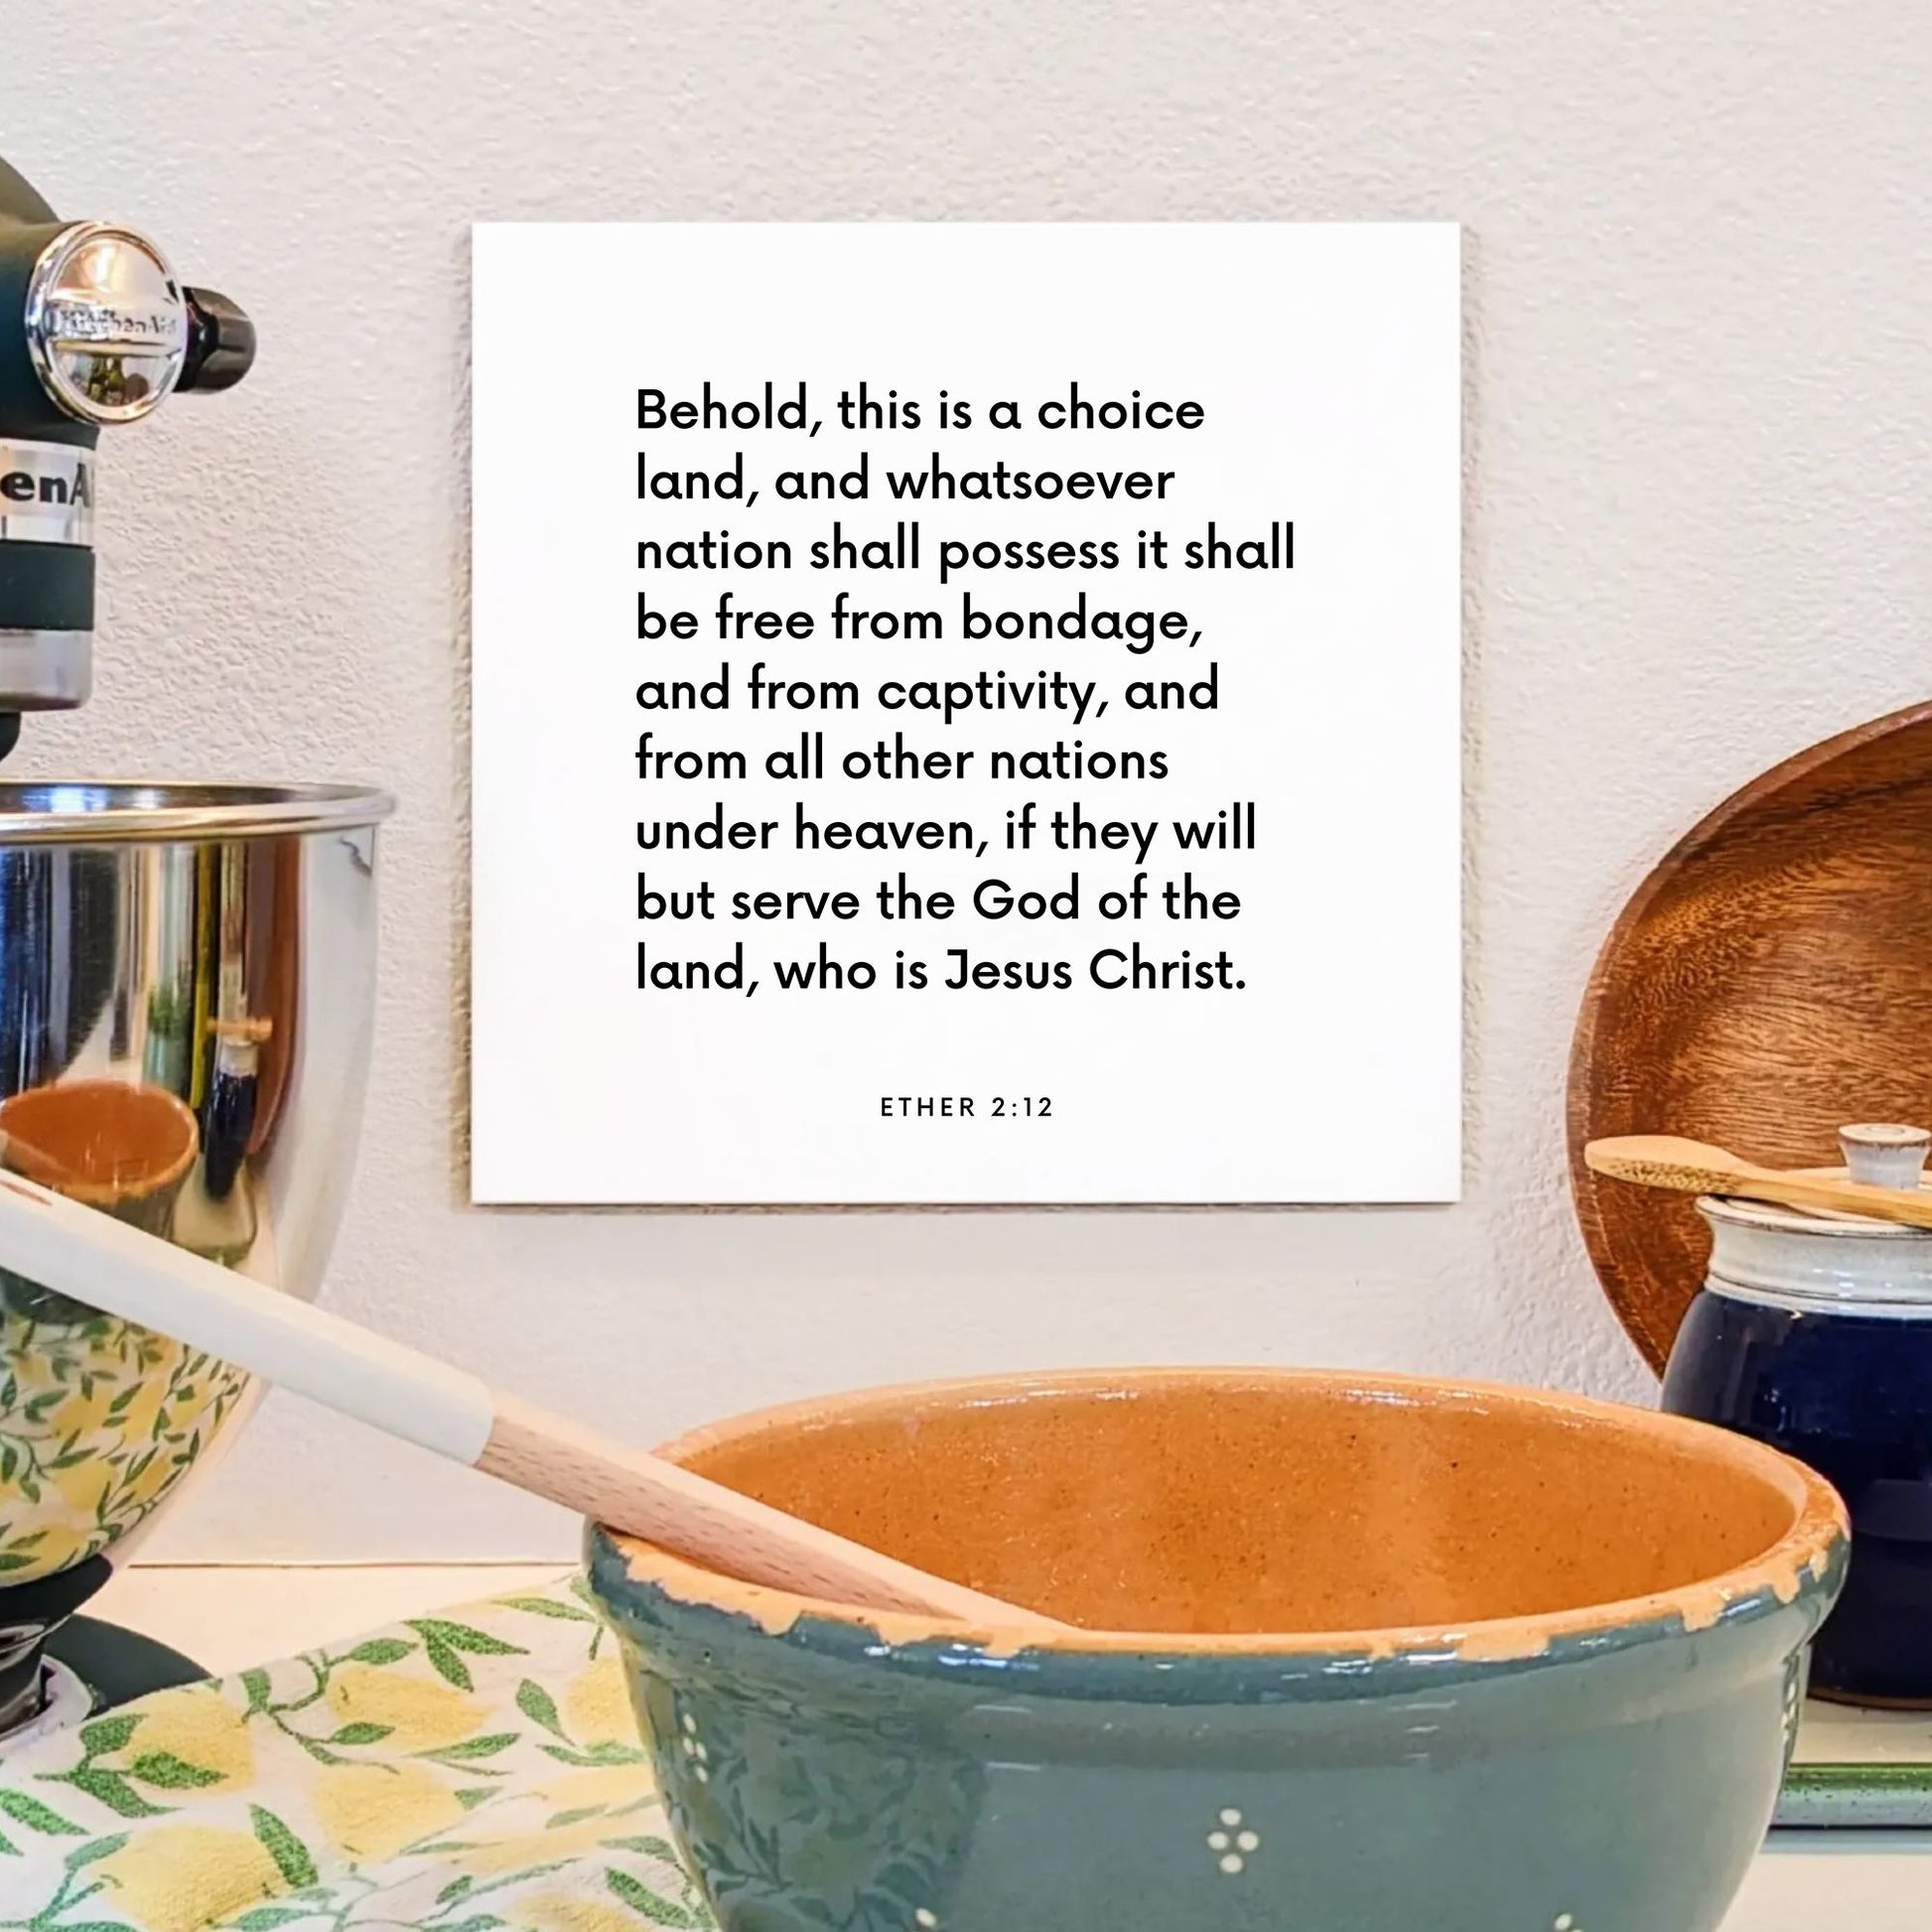 Kitchen mouting of the scripture tile for Ether 2:12 - "This is a choice land"